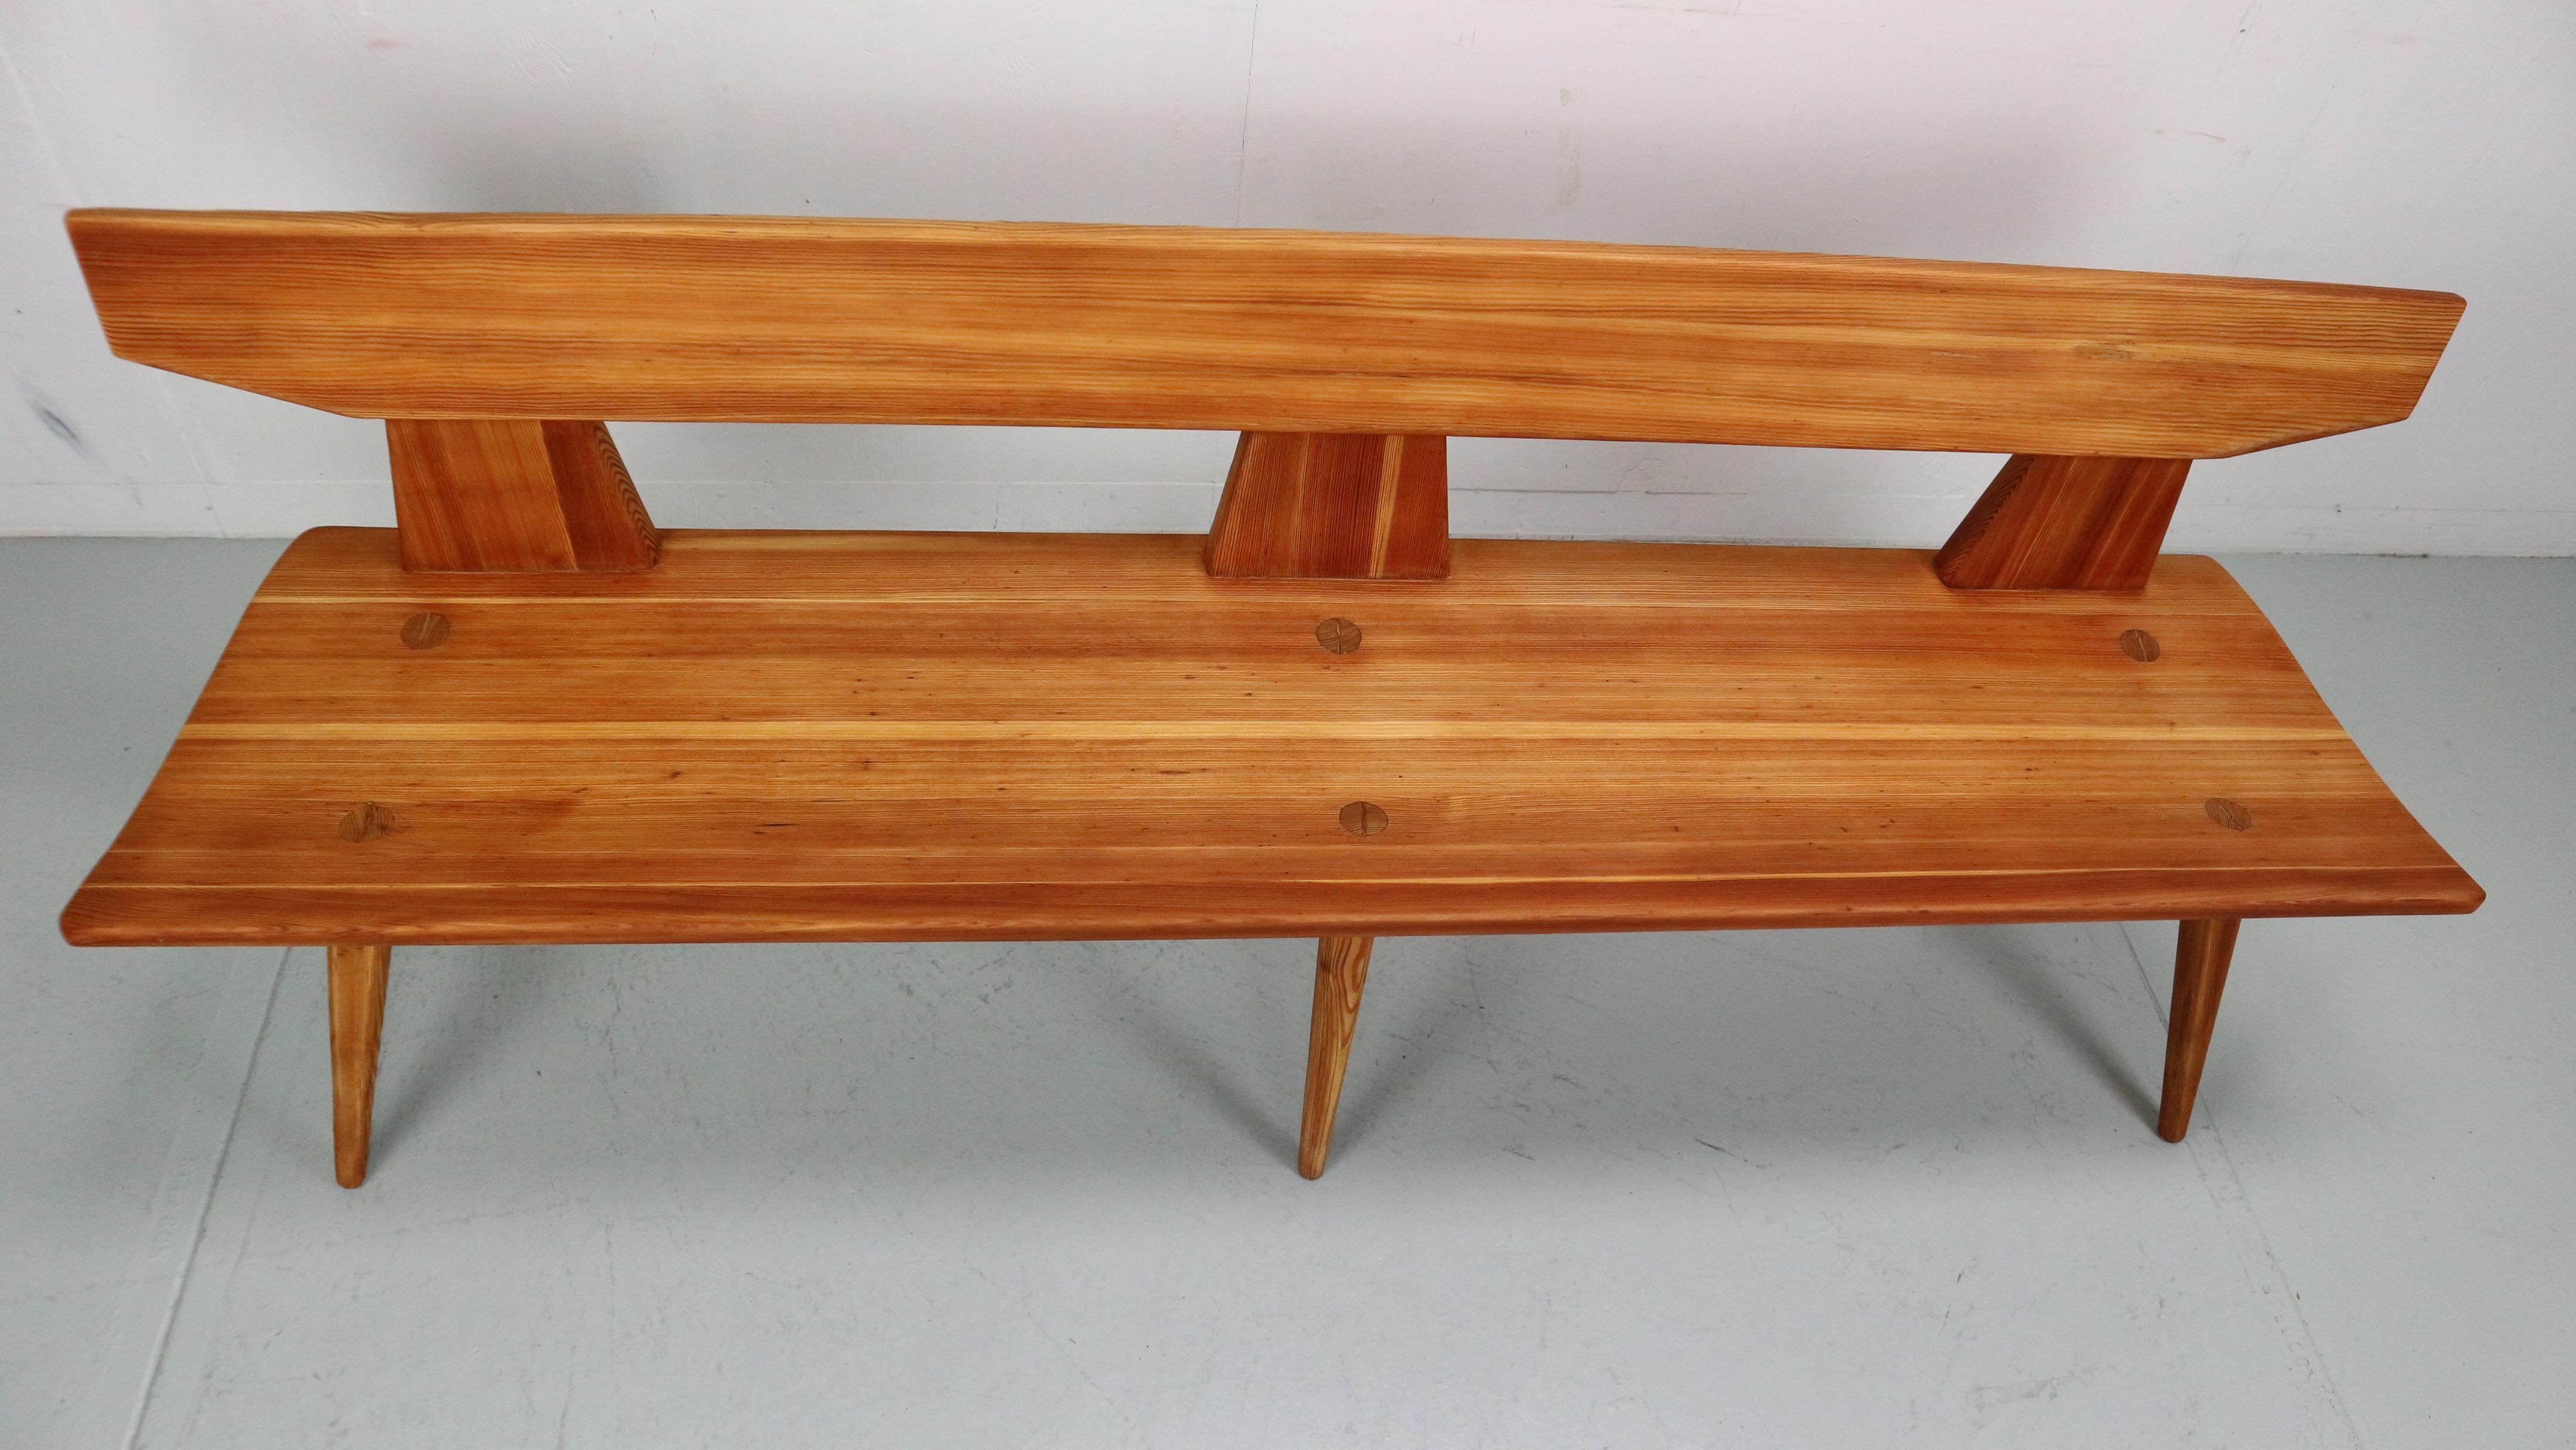 Jacob Kielland Brandt Bench in Pine Wood for Christiansen, Handcrafted, 1960s For Sale 11